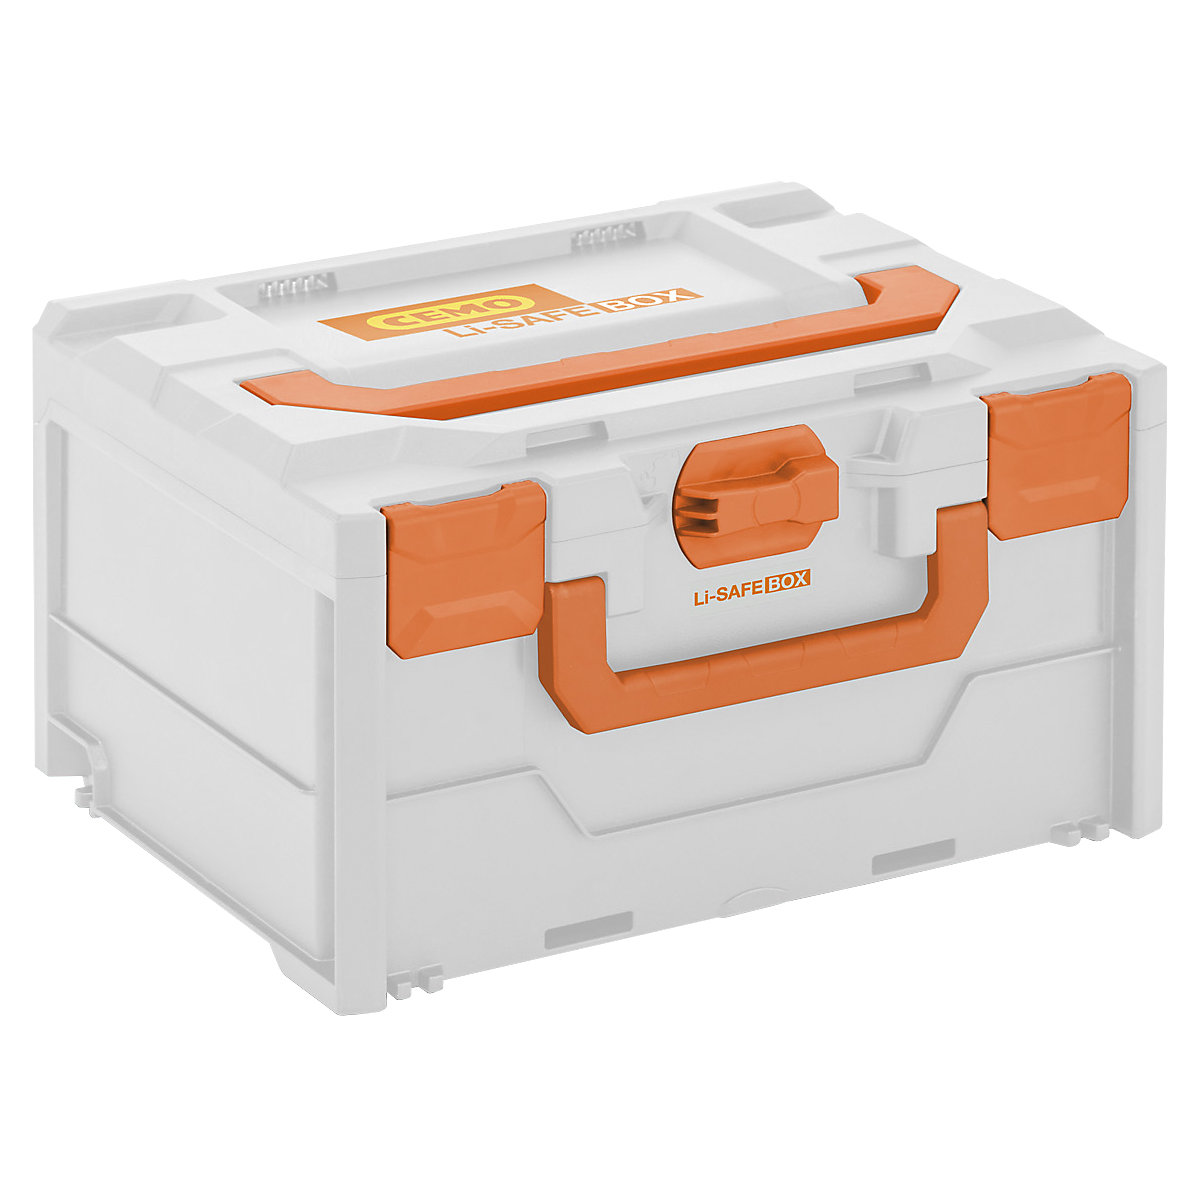 Li-SAFE modular fire protection box for rechargeable batteries - CEMO